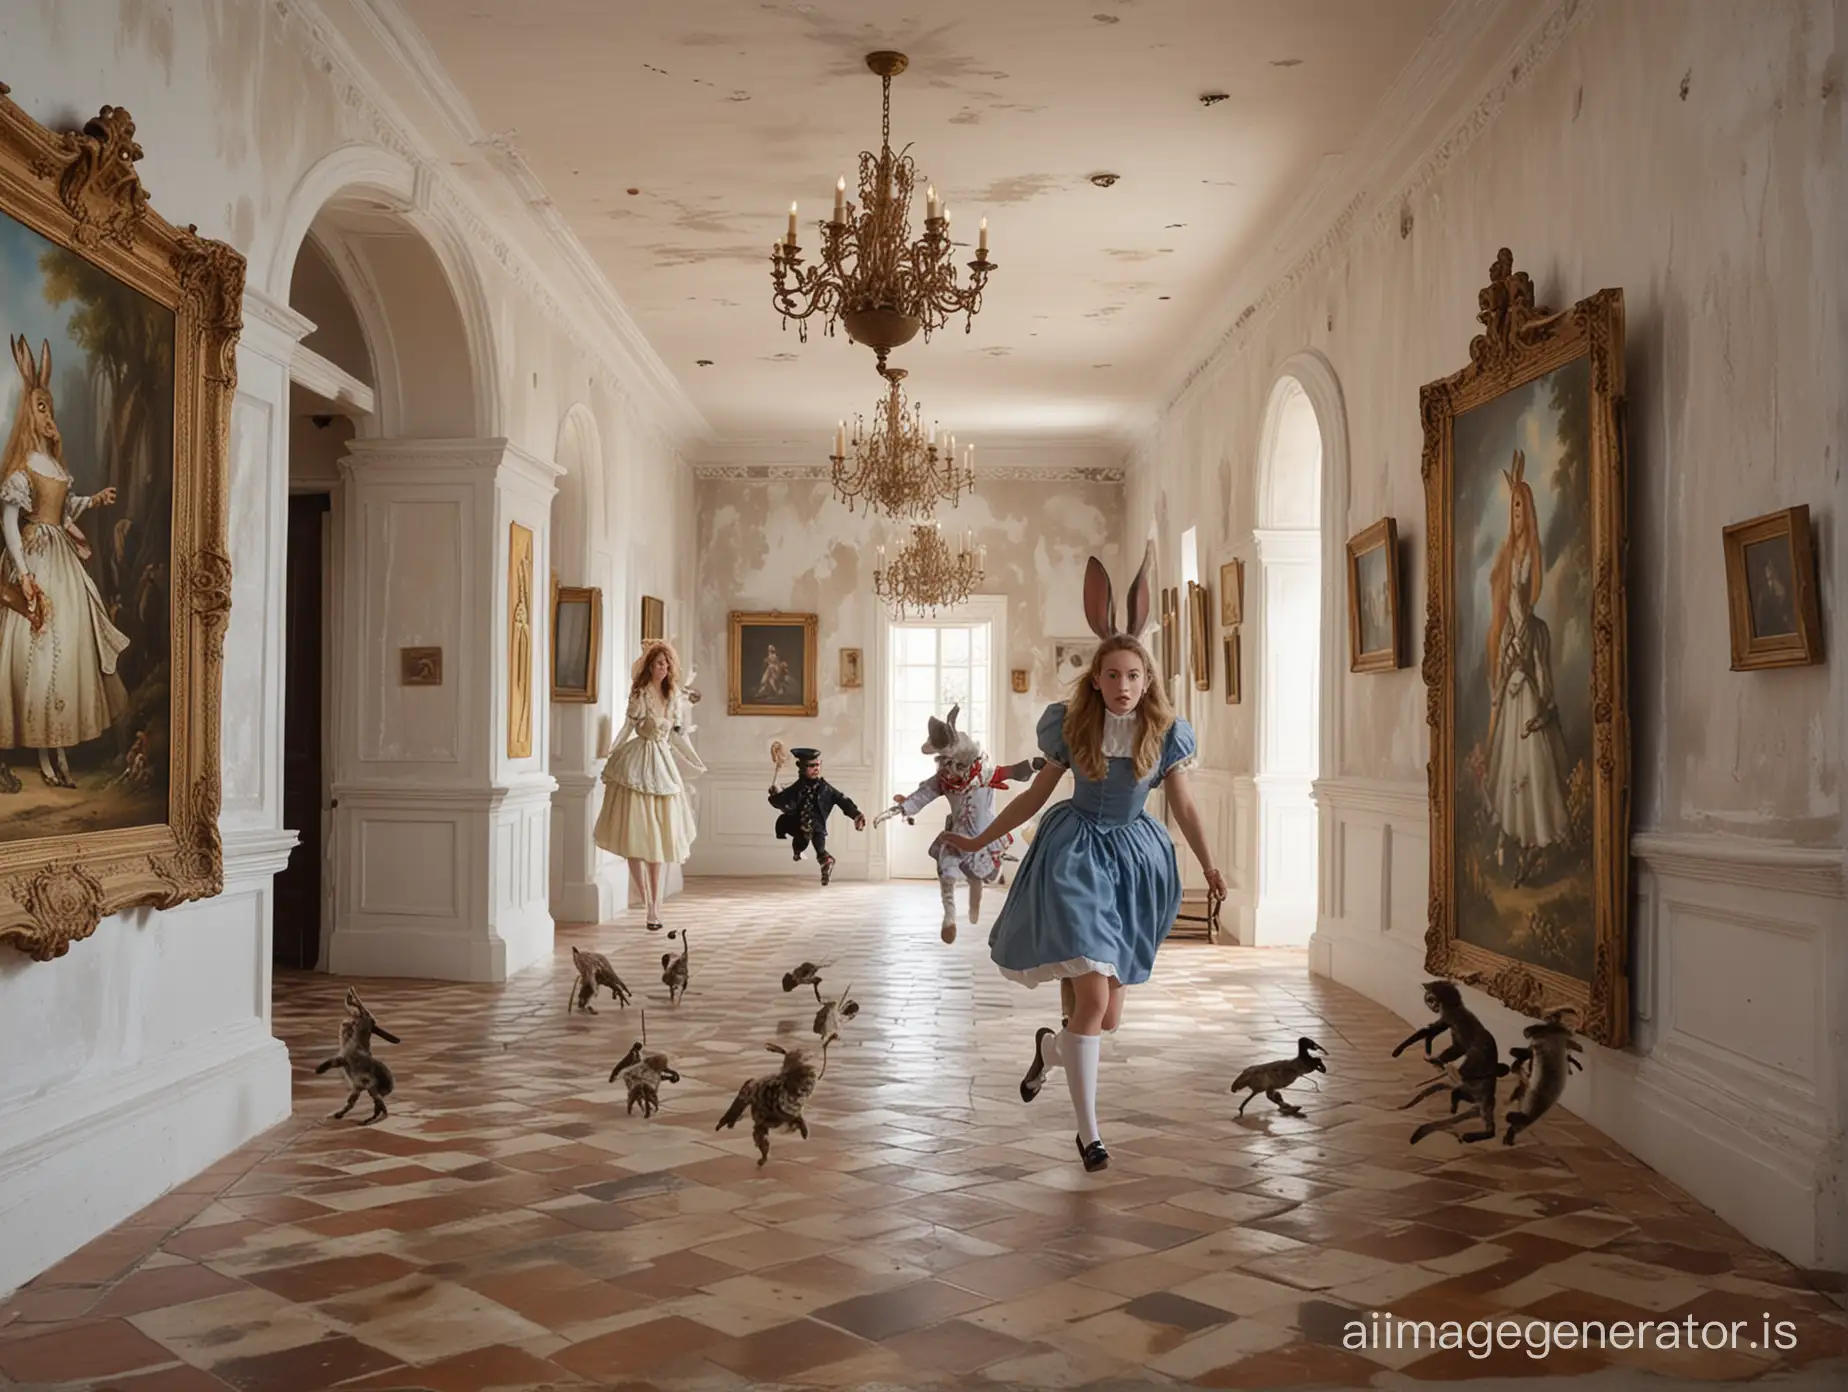 Alice in Wonderland. Running through the castle. A rabbit dressed in clothes is running in front of Alice. On the white walls, there are statues, large paintings, luxurious interiors. Many large owls are flying around, making noise. Part of the wall reveals the universe and nebulae. There is a large tarantula on the ceiling.